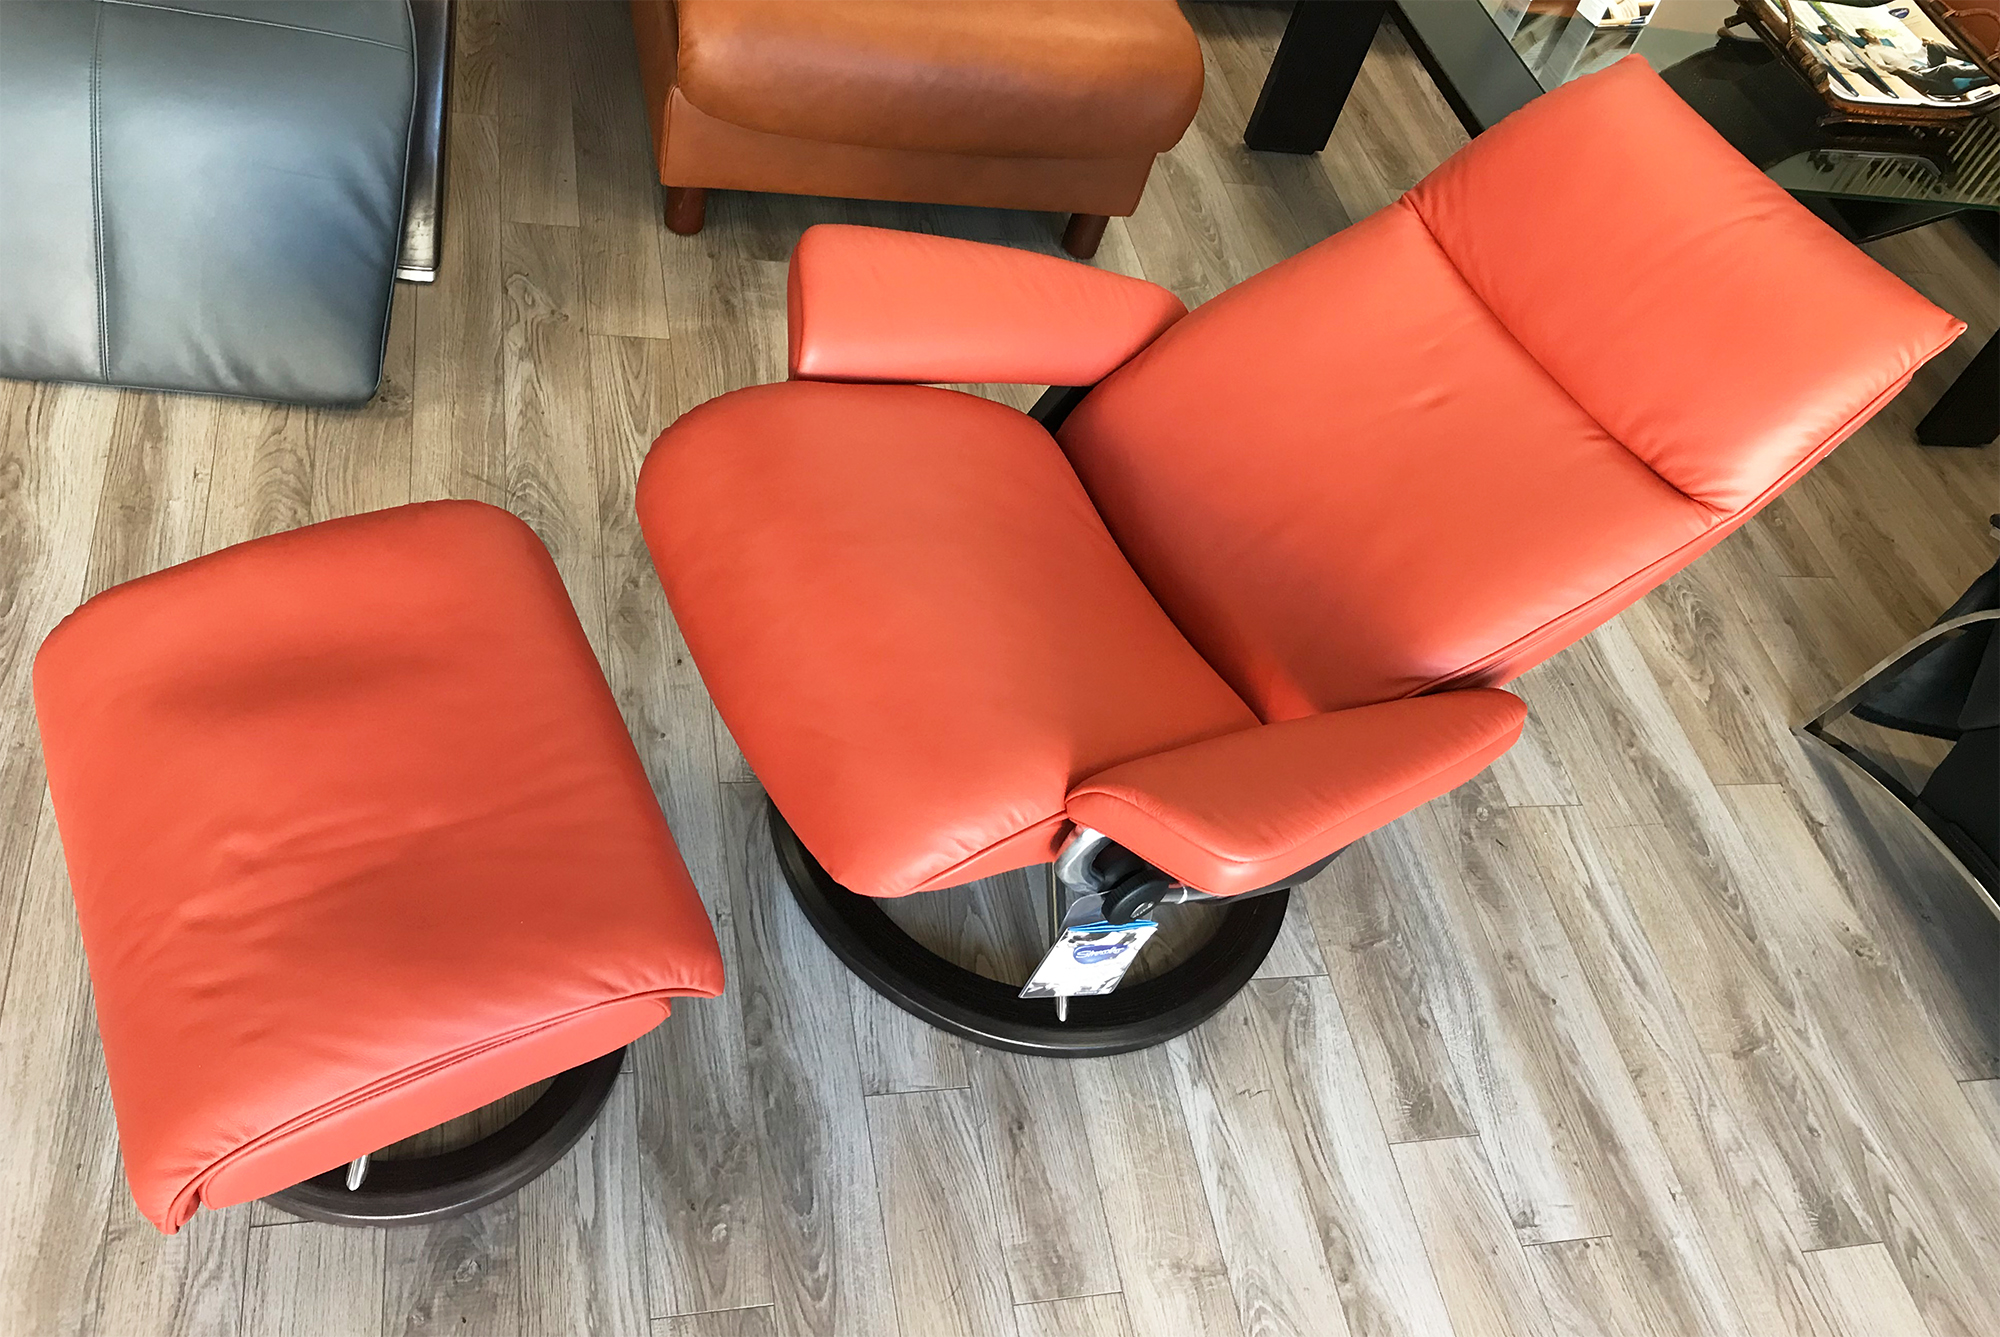 Signature Base Paloma Aura - Chairs Leather Leather Base Recliner Henna Henna Chair and by Signature Ekornes Stressless Ottoman Stressless Aura Recliners Paloma